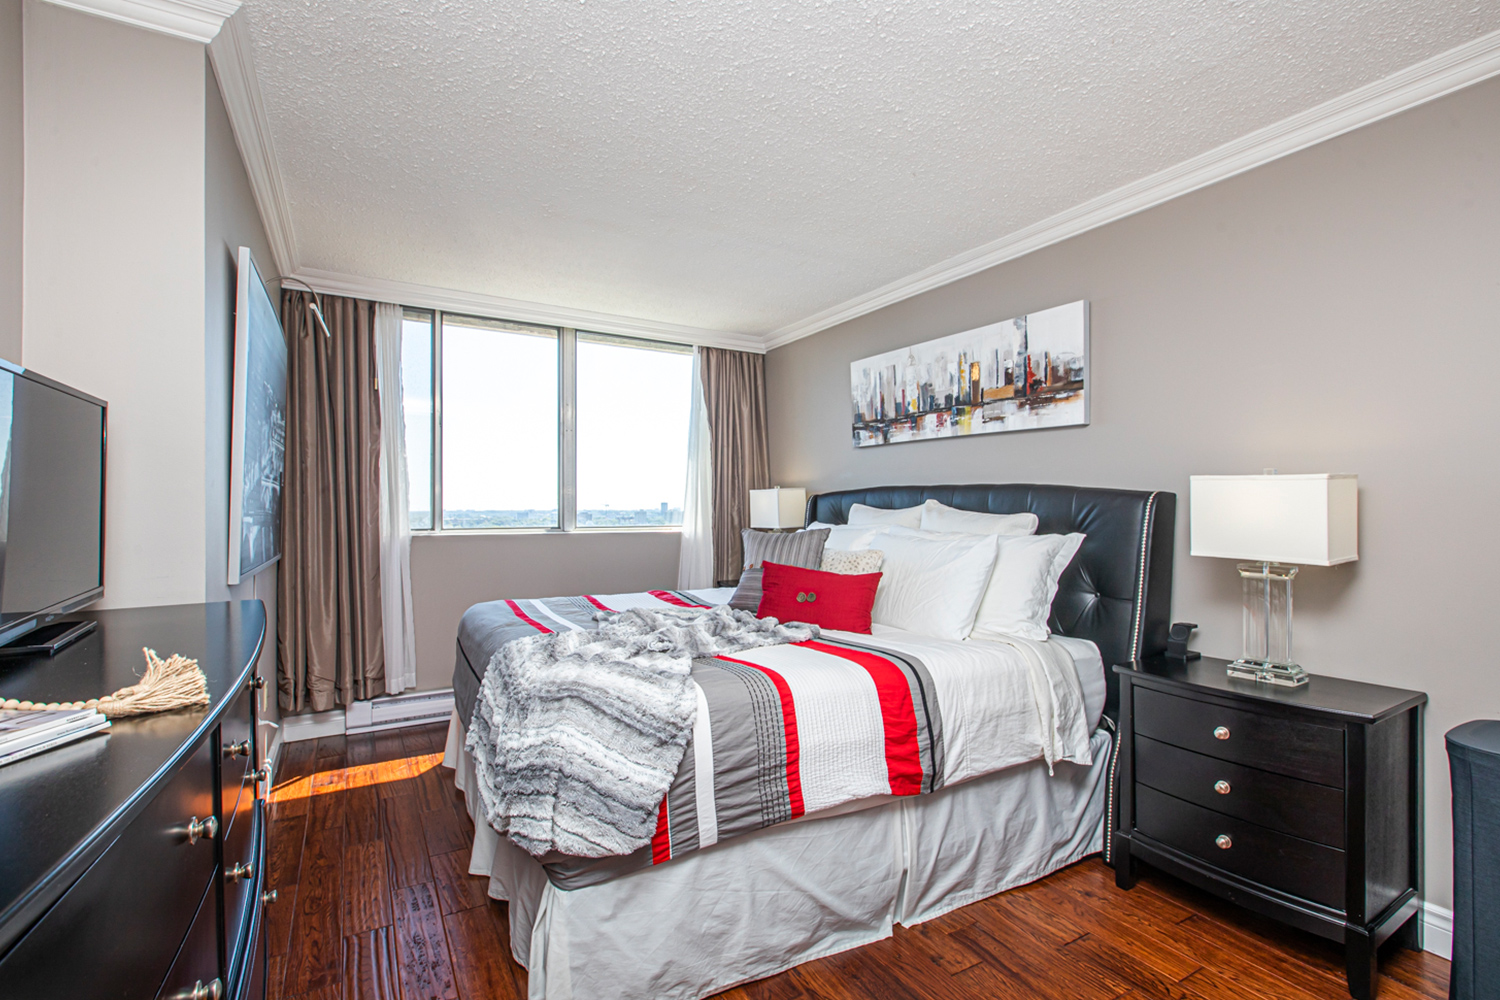 Listing__1530-530-Laurier-Ave-W__09